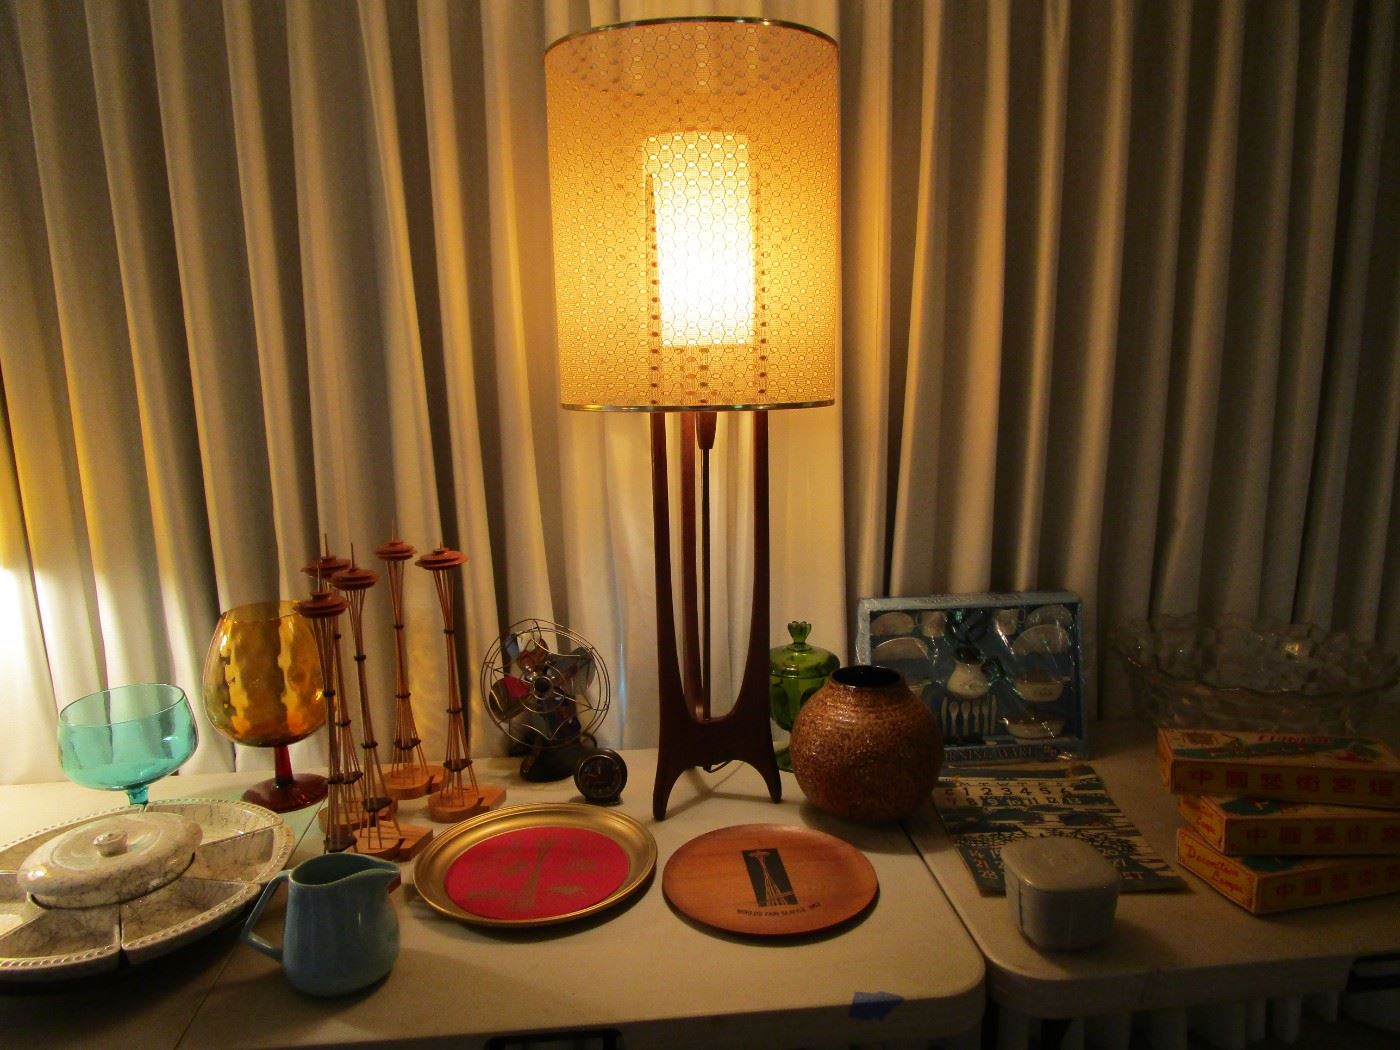 Modeline Mid Century Lamp Seattle World's Fair Space Needles and more